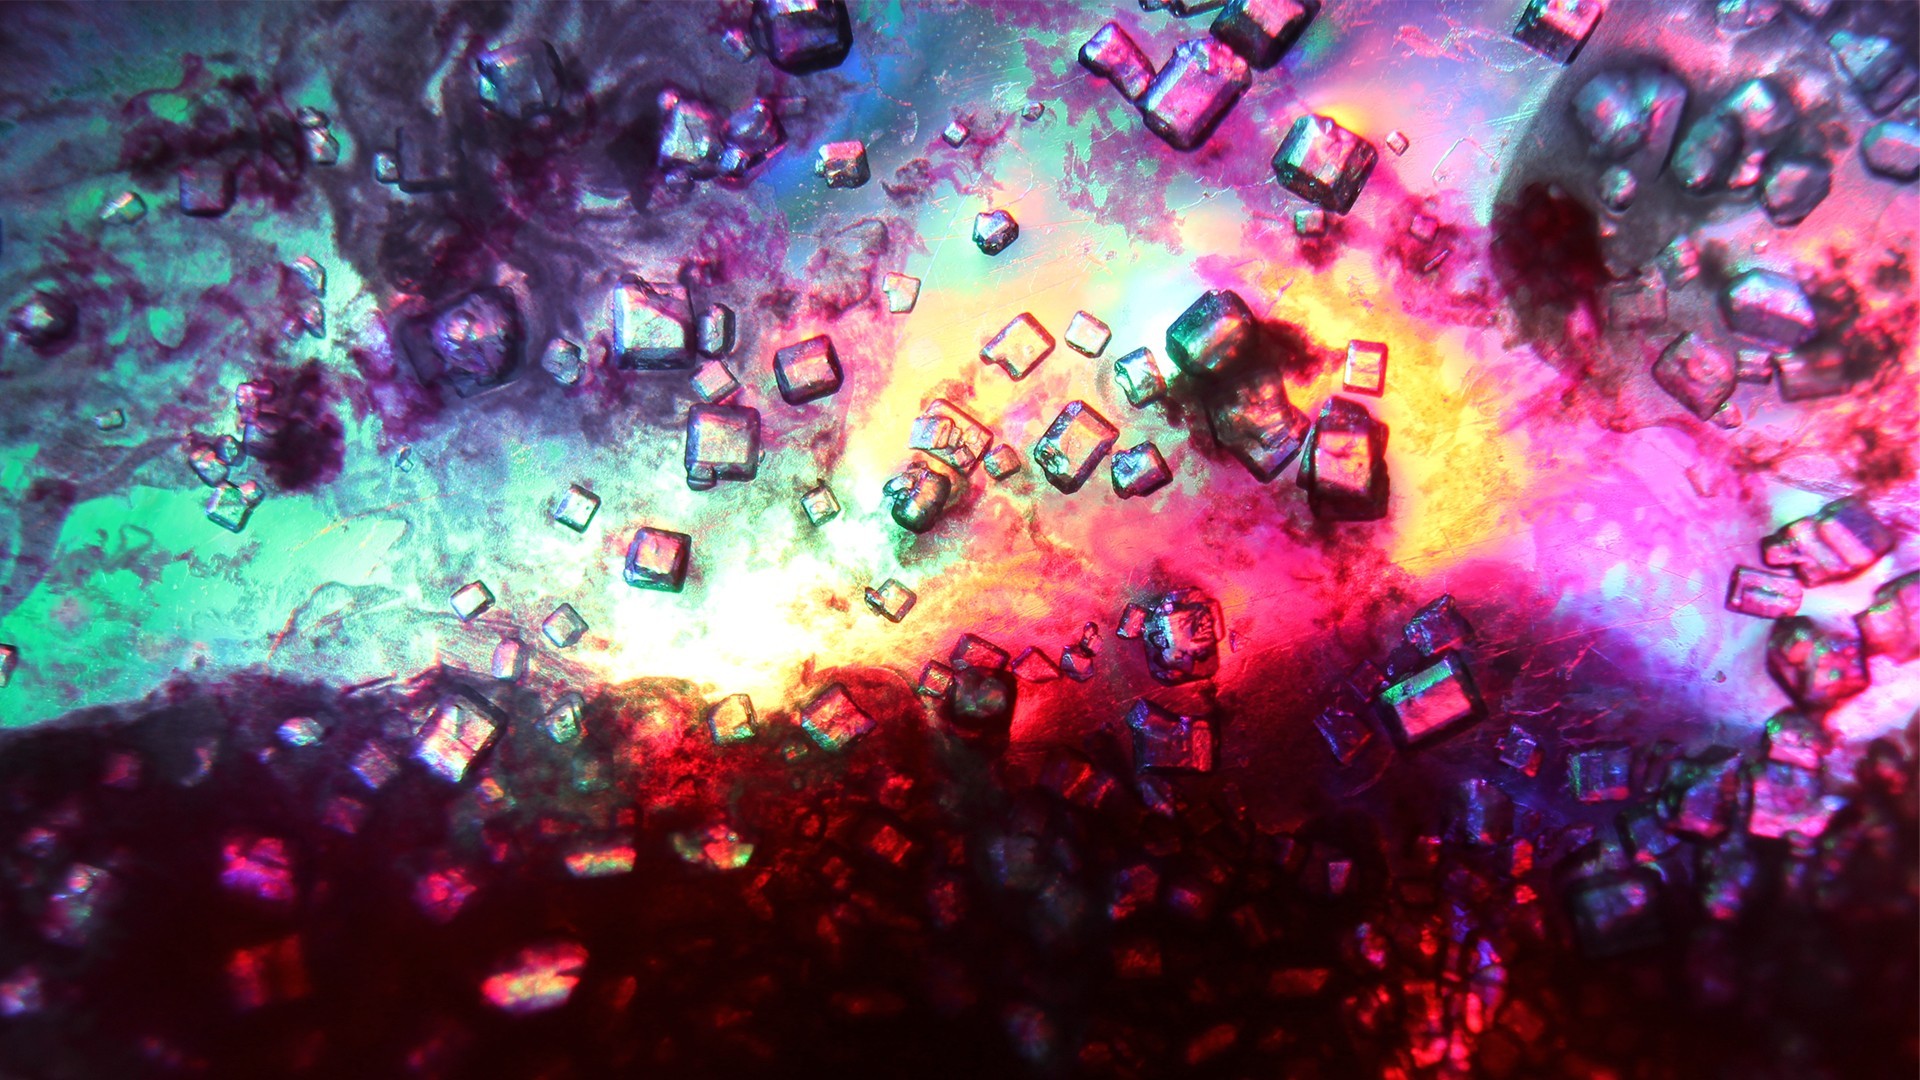 Abstract Colorful Digital Art Melting 1920x1080